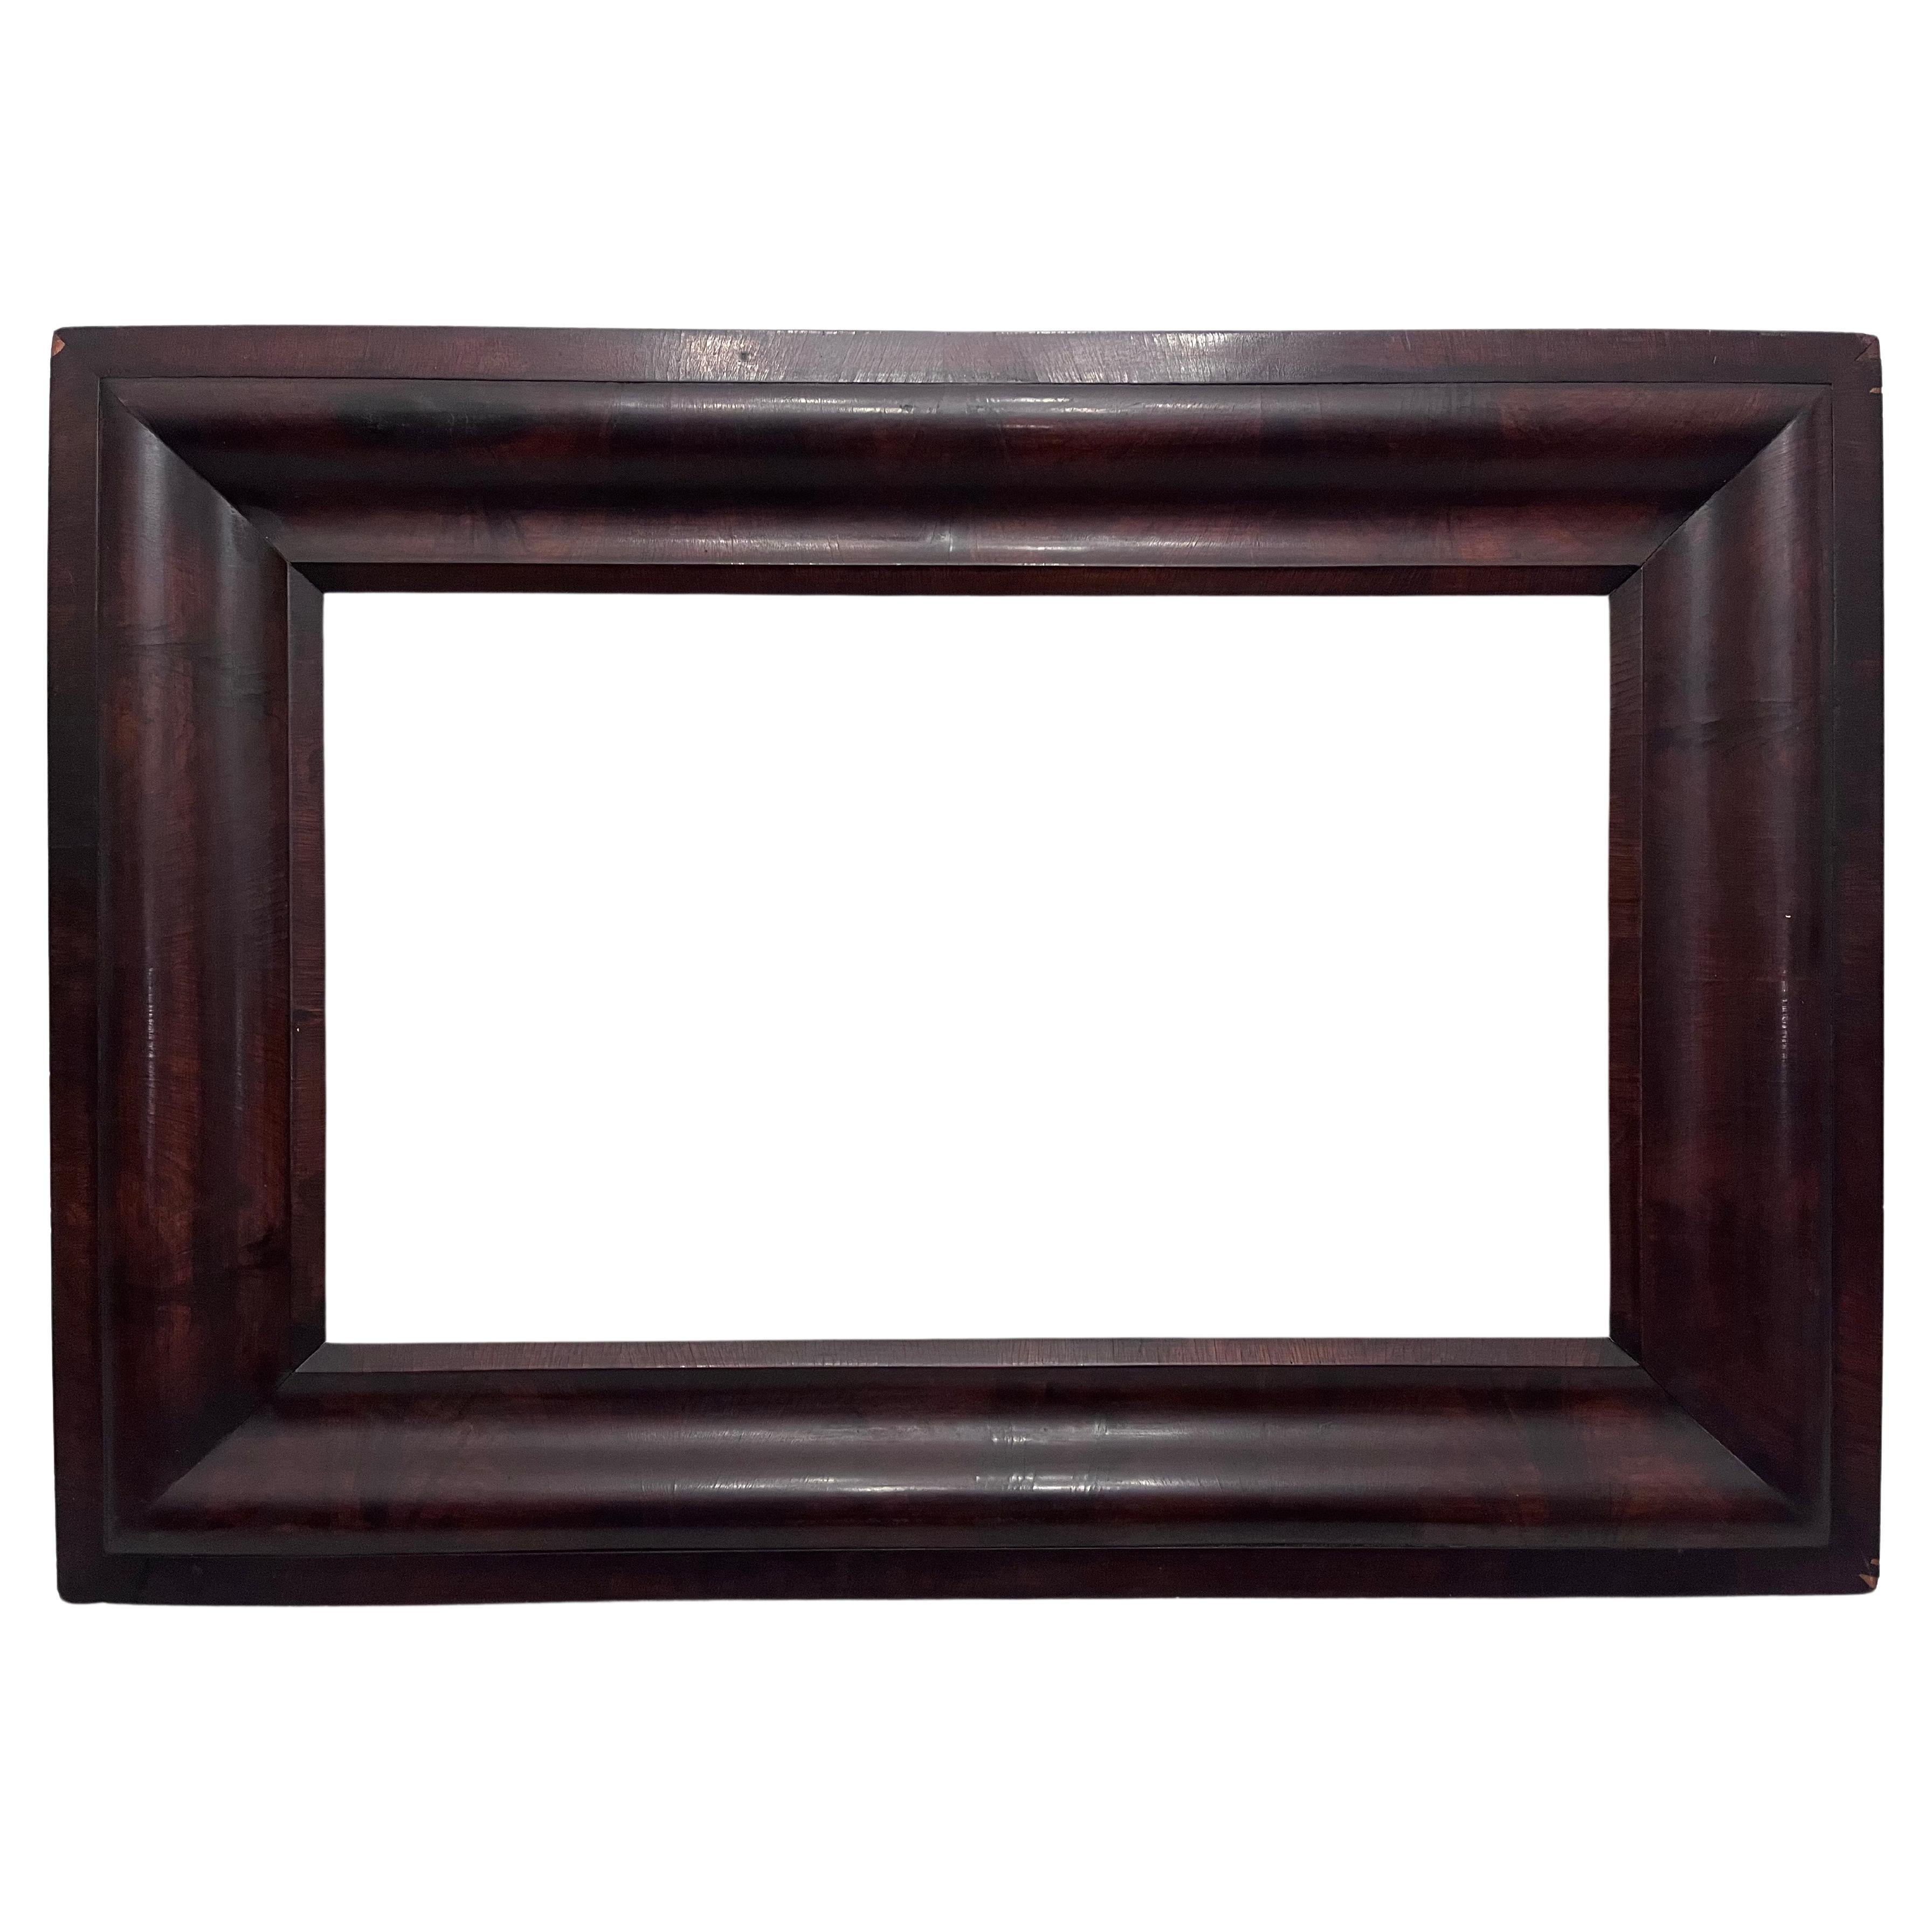 Antique 19th Century American Empire Style Large Picture Mirror Frame 22 x 13 For Sale